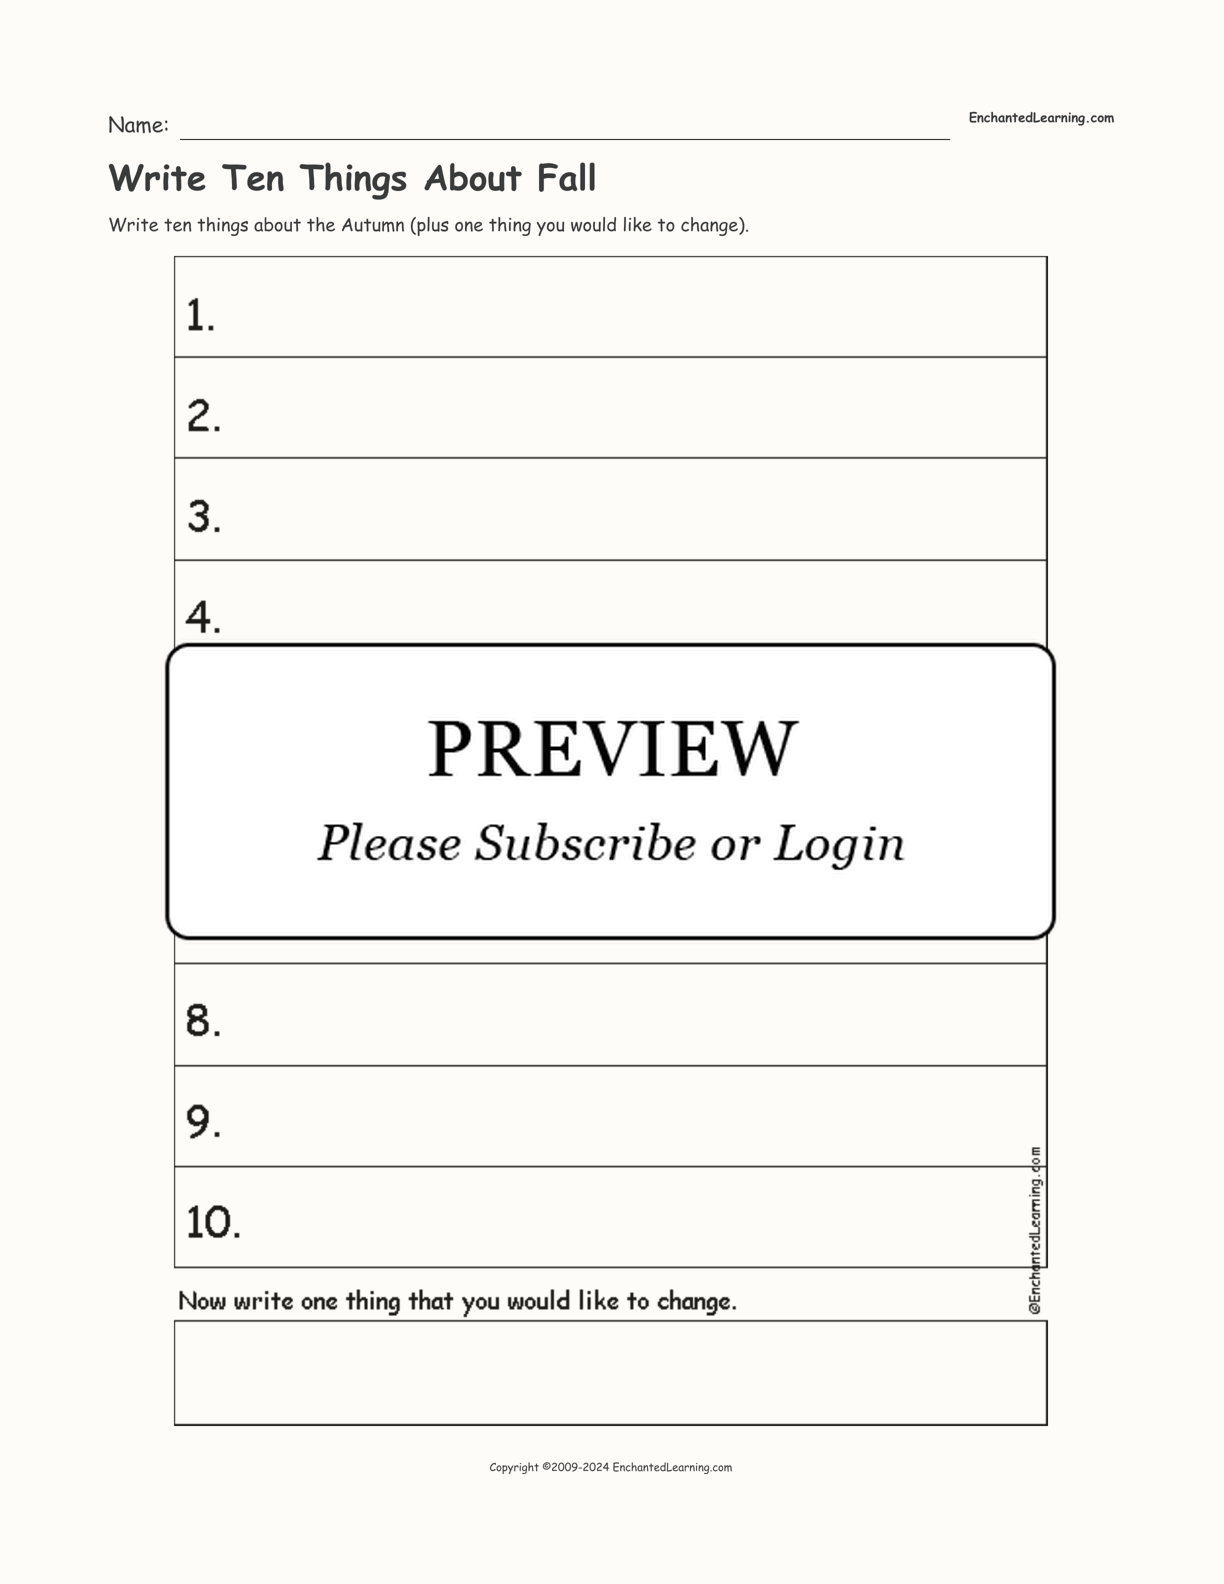 Write Ten Things About Fall interactive worksheet page 1